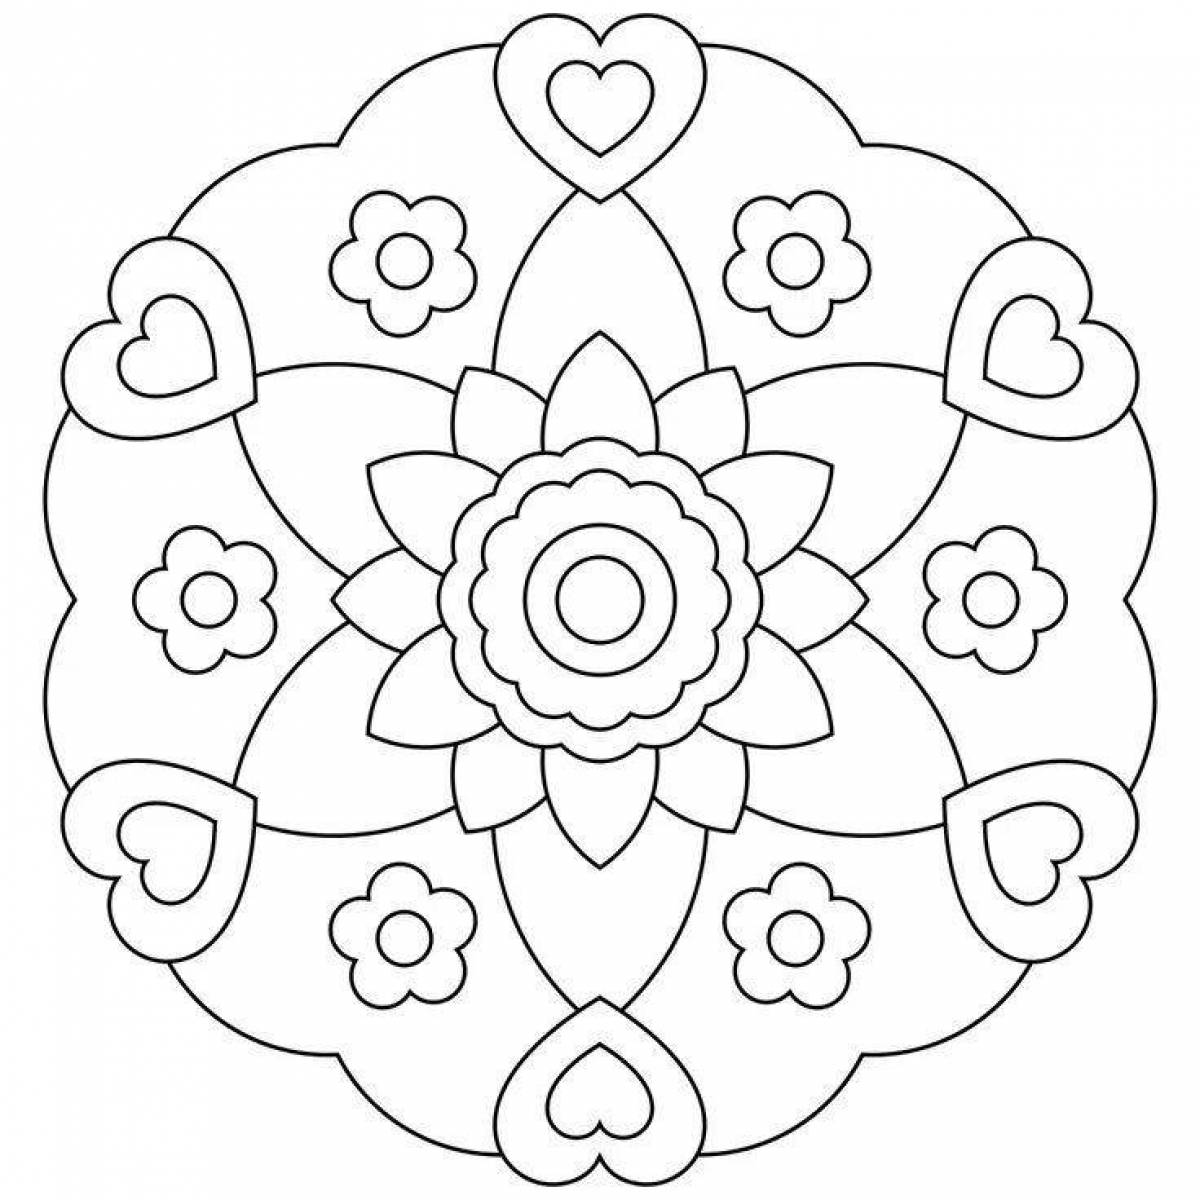 Fun patterns and ornaments for coloring